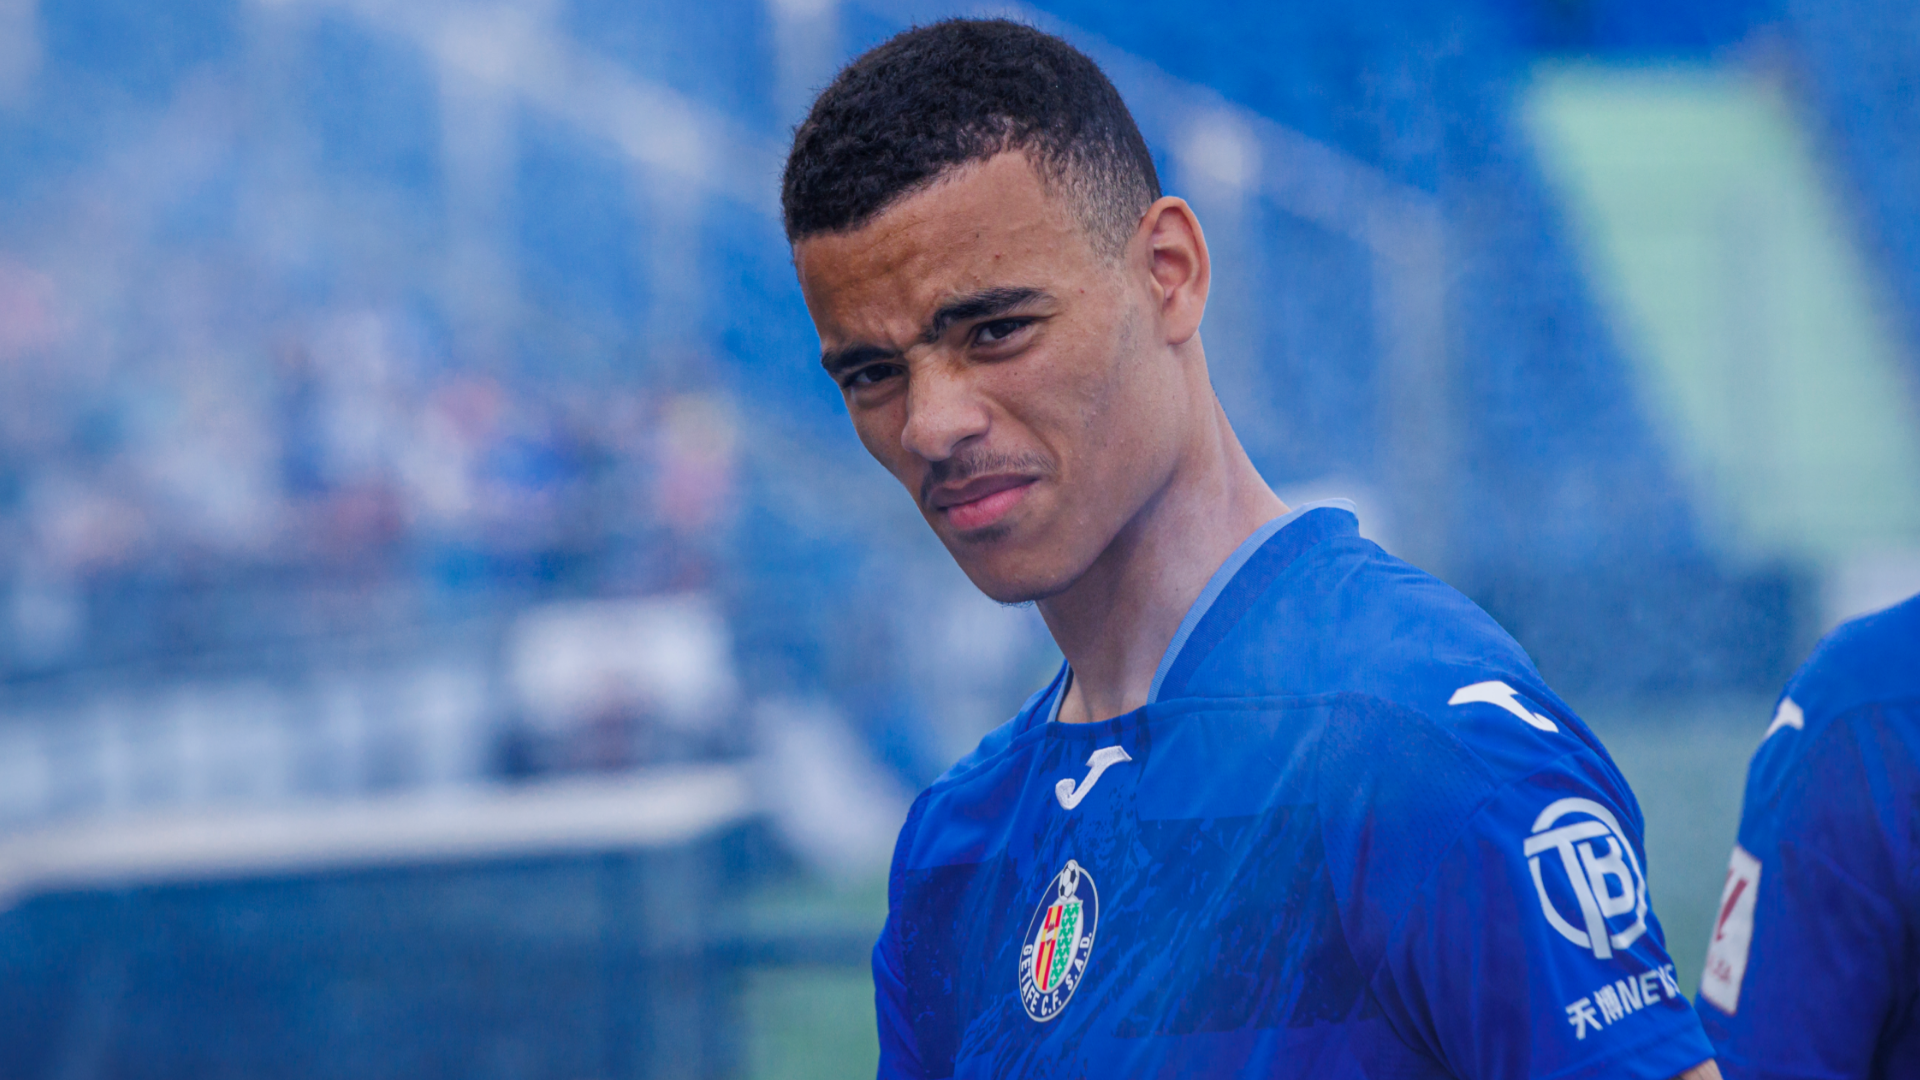 Mason Greenwood’s image rights company goes into liquidation following striker's suspension from Man Utd and move to Getafe